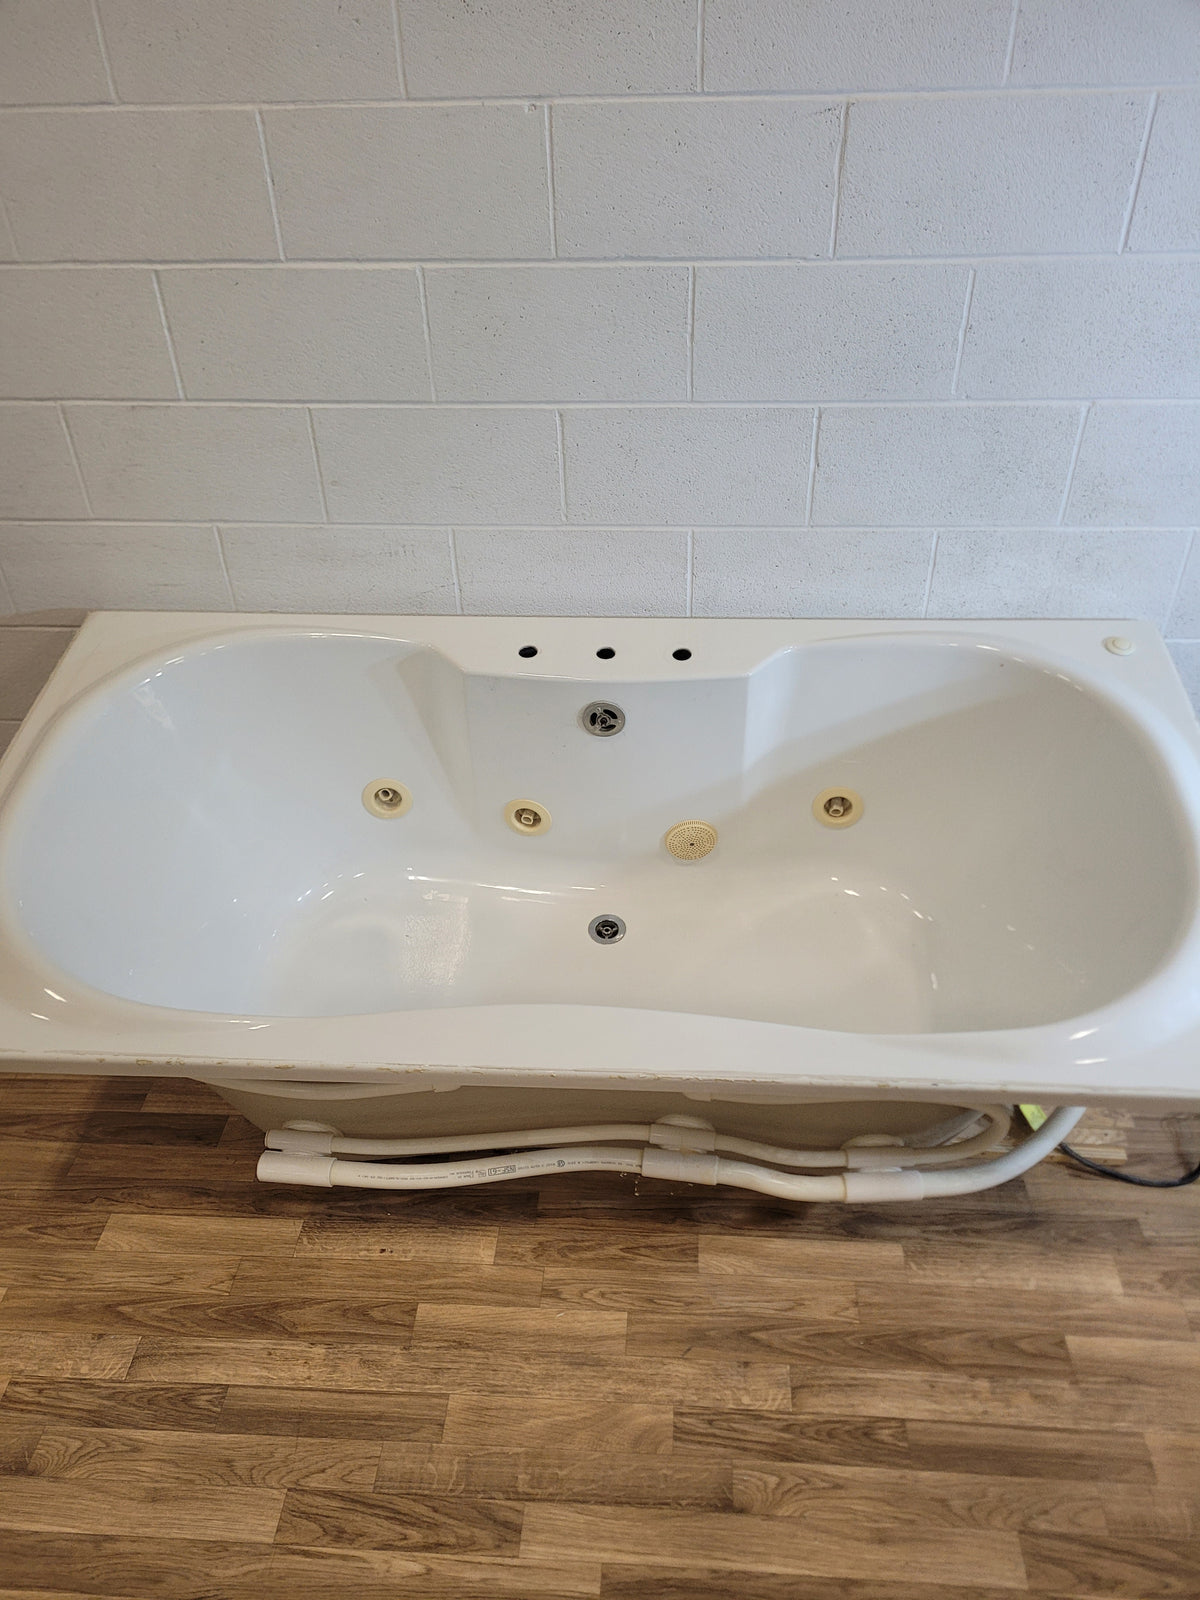 Acrylic Jetted Tub